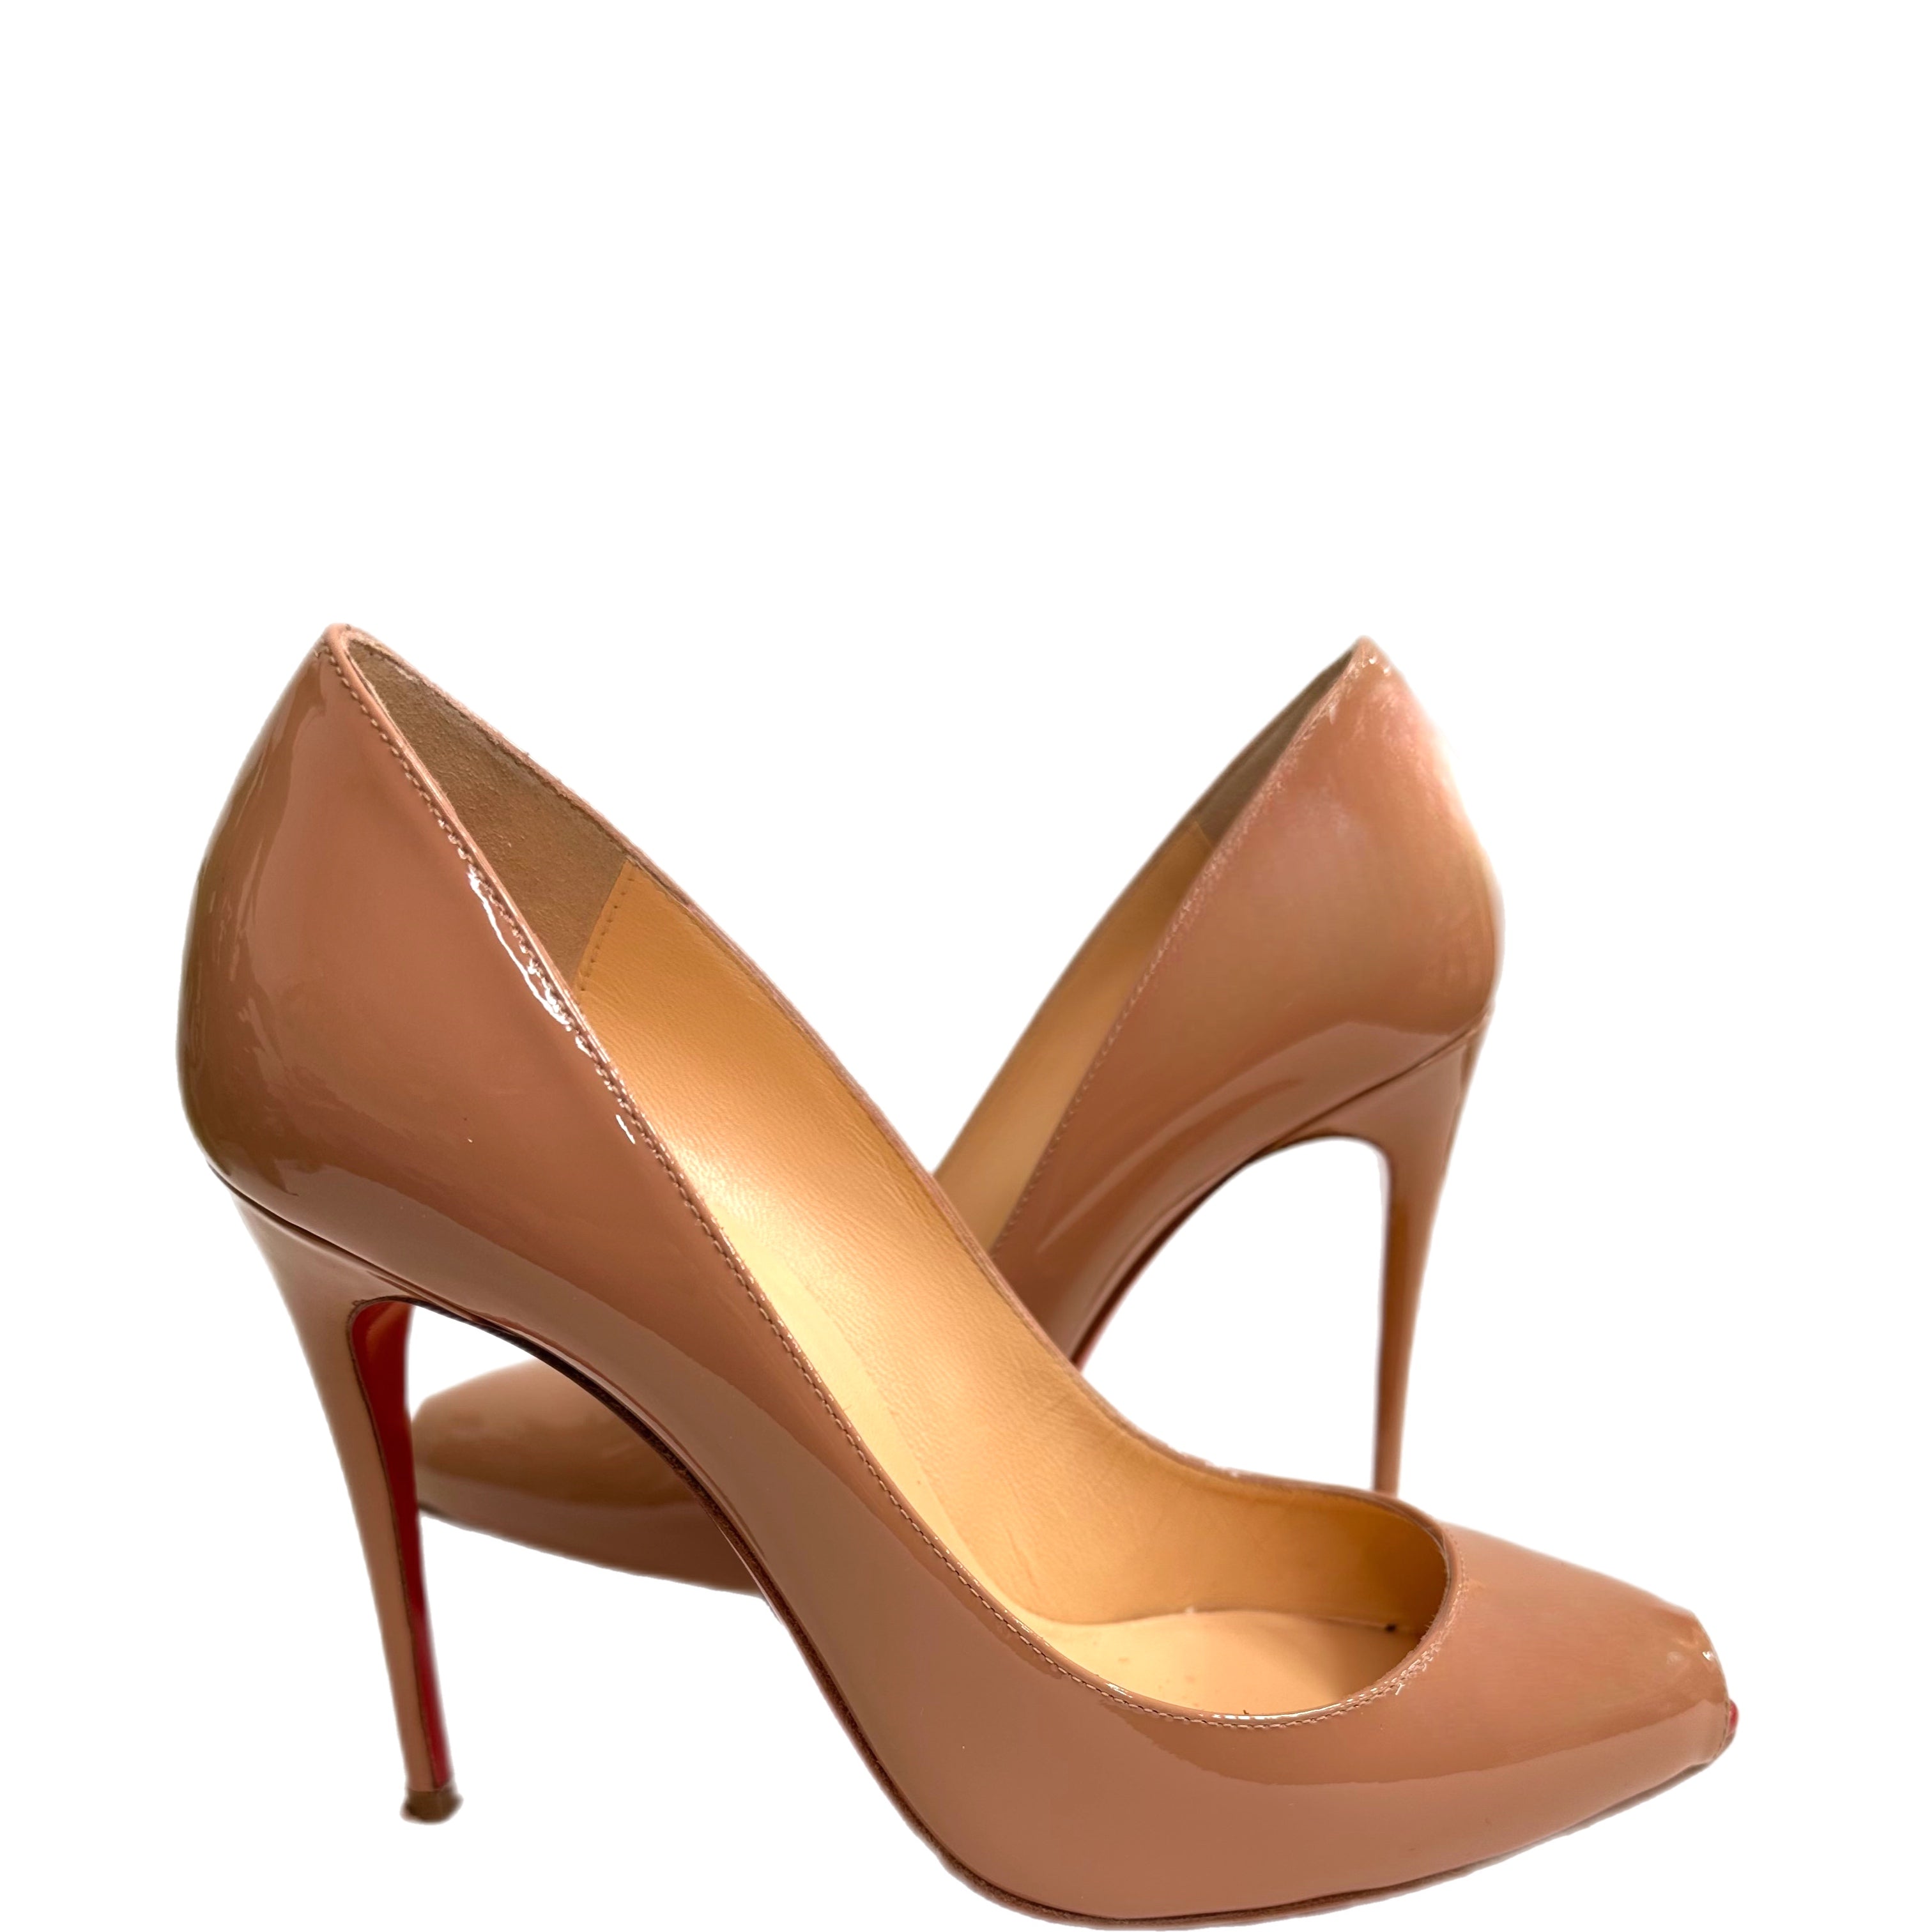 Christian Louboutin Pumppie Patent Leather Pumps 85 - Nude - 36.5